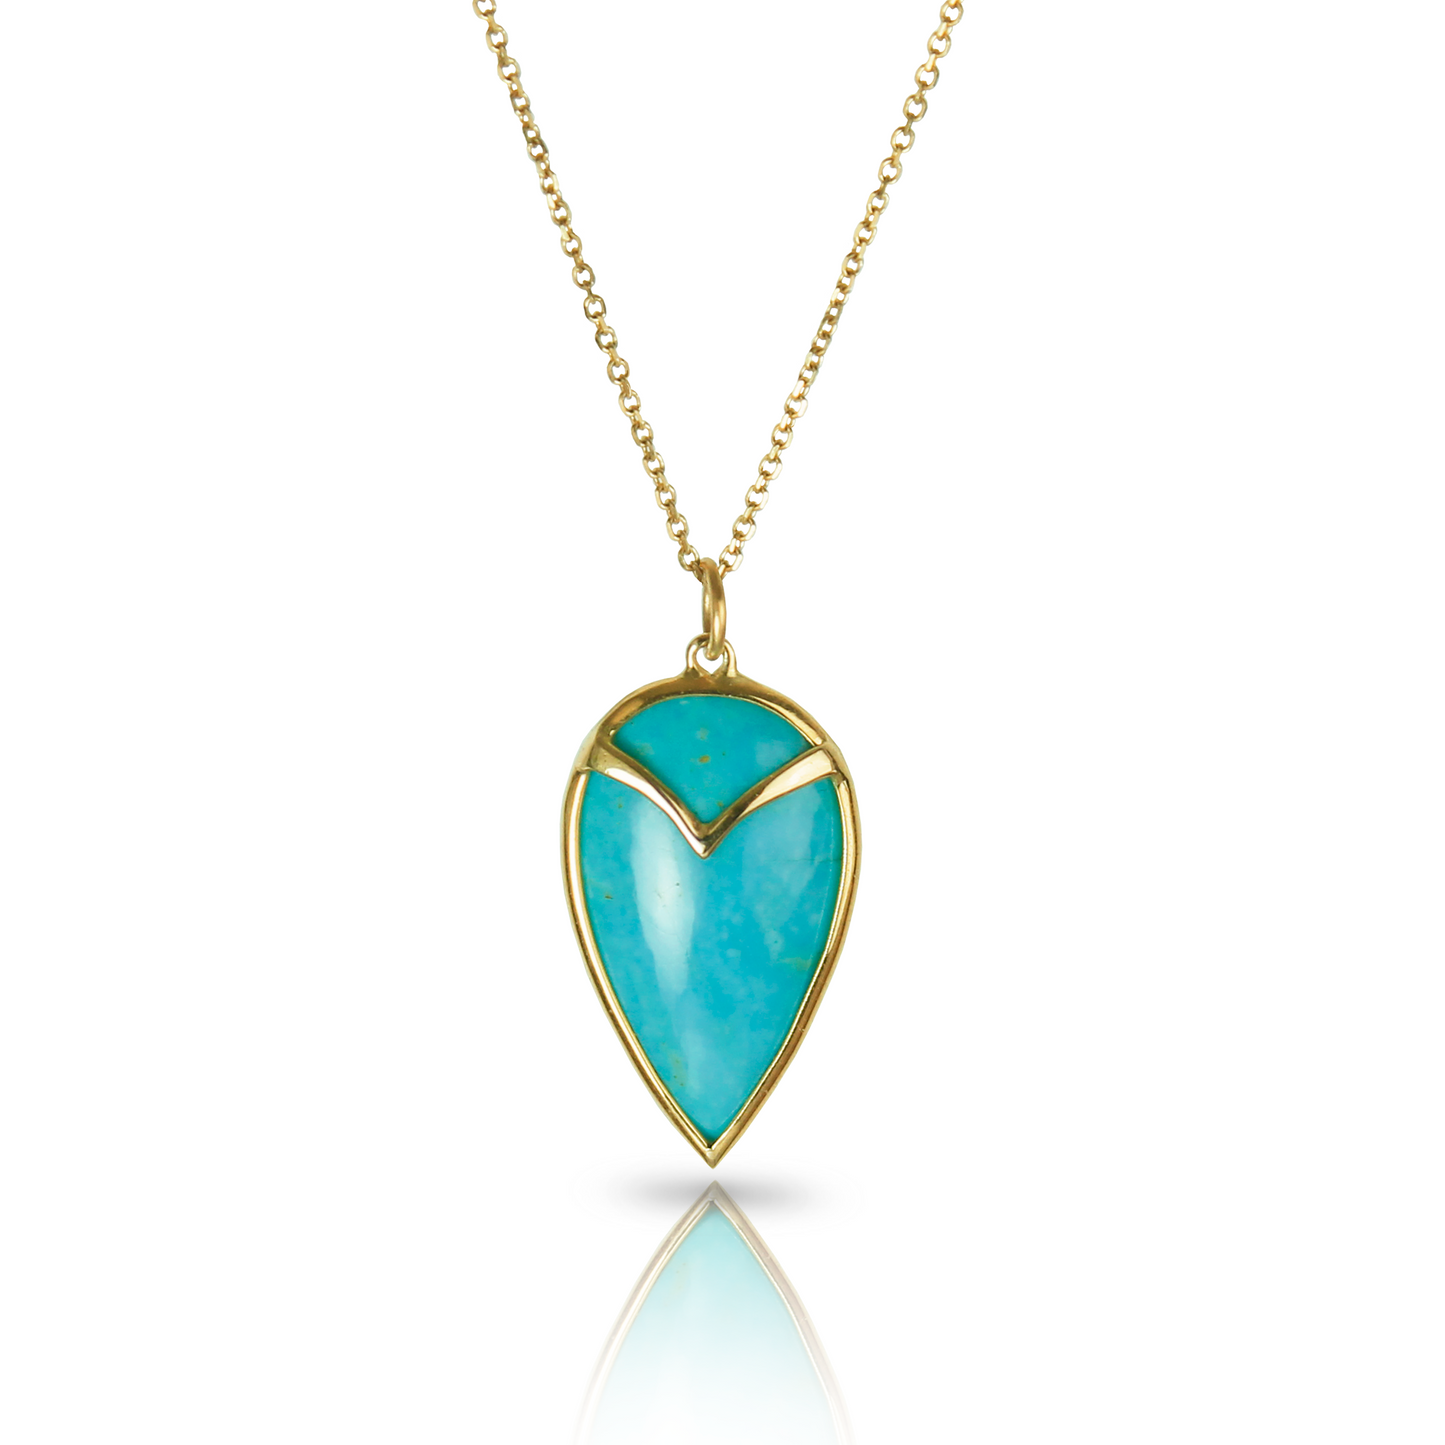 Gold necklace with bezel set, teardrop shaped, turquoise stone on a gold chain